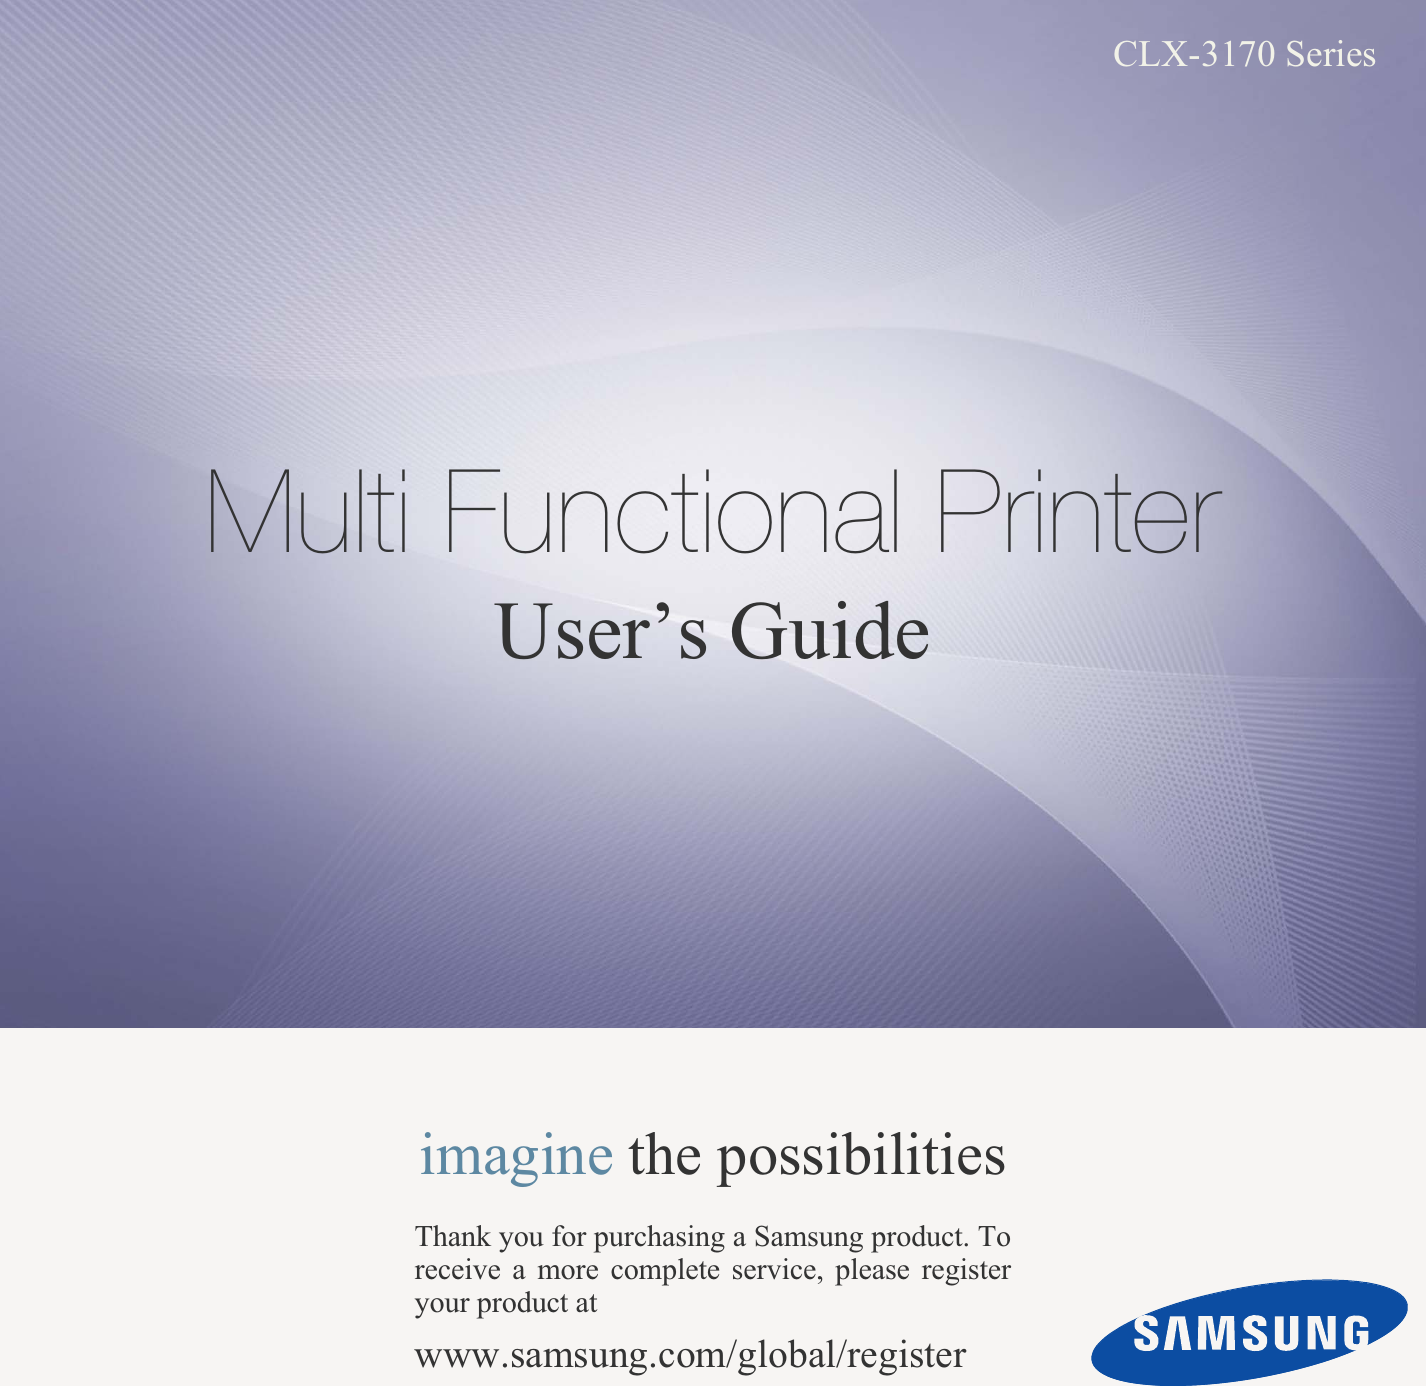 CLX-3170 SeriesMulti Functional PrinterUser’s Guideimagine the possibilitiesThank you for purchasing a Samsung product. Toreceive a more complete service, please registeryour product atwww.samsung.com/global/register